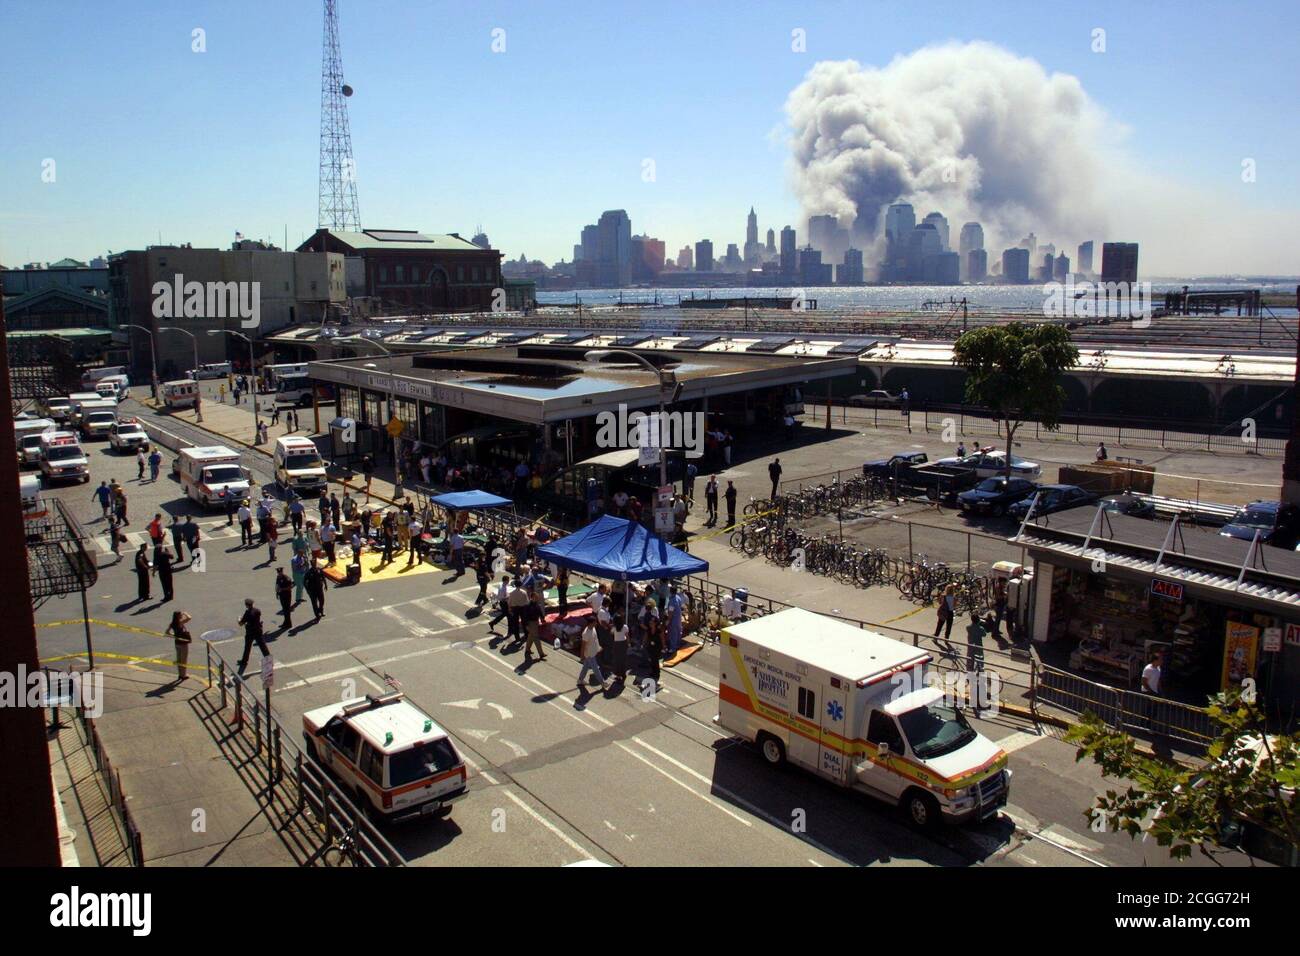 Ambulances and volunteers wait for the injured to arrive in Hoboken, New Jersey, after the attack on the World Trade Center in New York on 9/11/2001. This morning two planes raced into the towers of the World Trade Center in quick succession. Besides the occupants of the machines, numerous people were probably killed inside the two skyscrapers in the heavy explosions. New York continues to be in shock after the unprecedented terrorist attack on its World Trade Center. Thousands of corpses are believed to be lying beneath the massive mountains of rubble of the World Trade Center. According to p Stock Photo